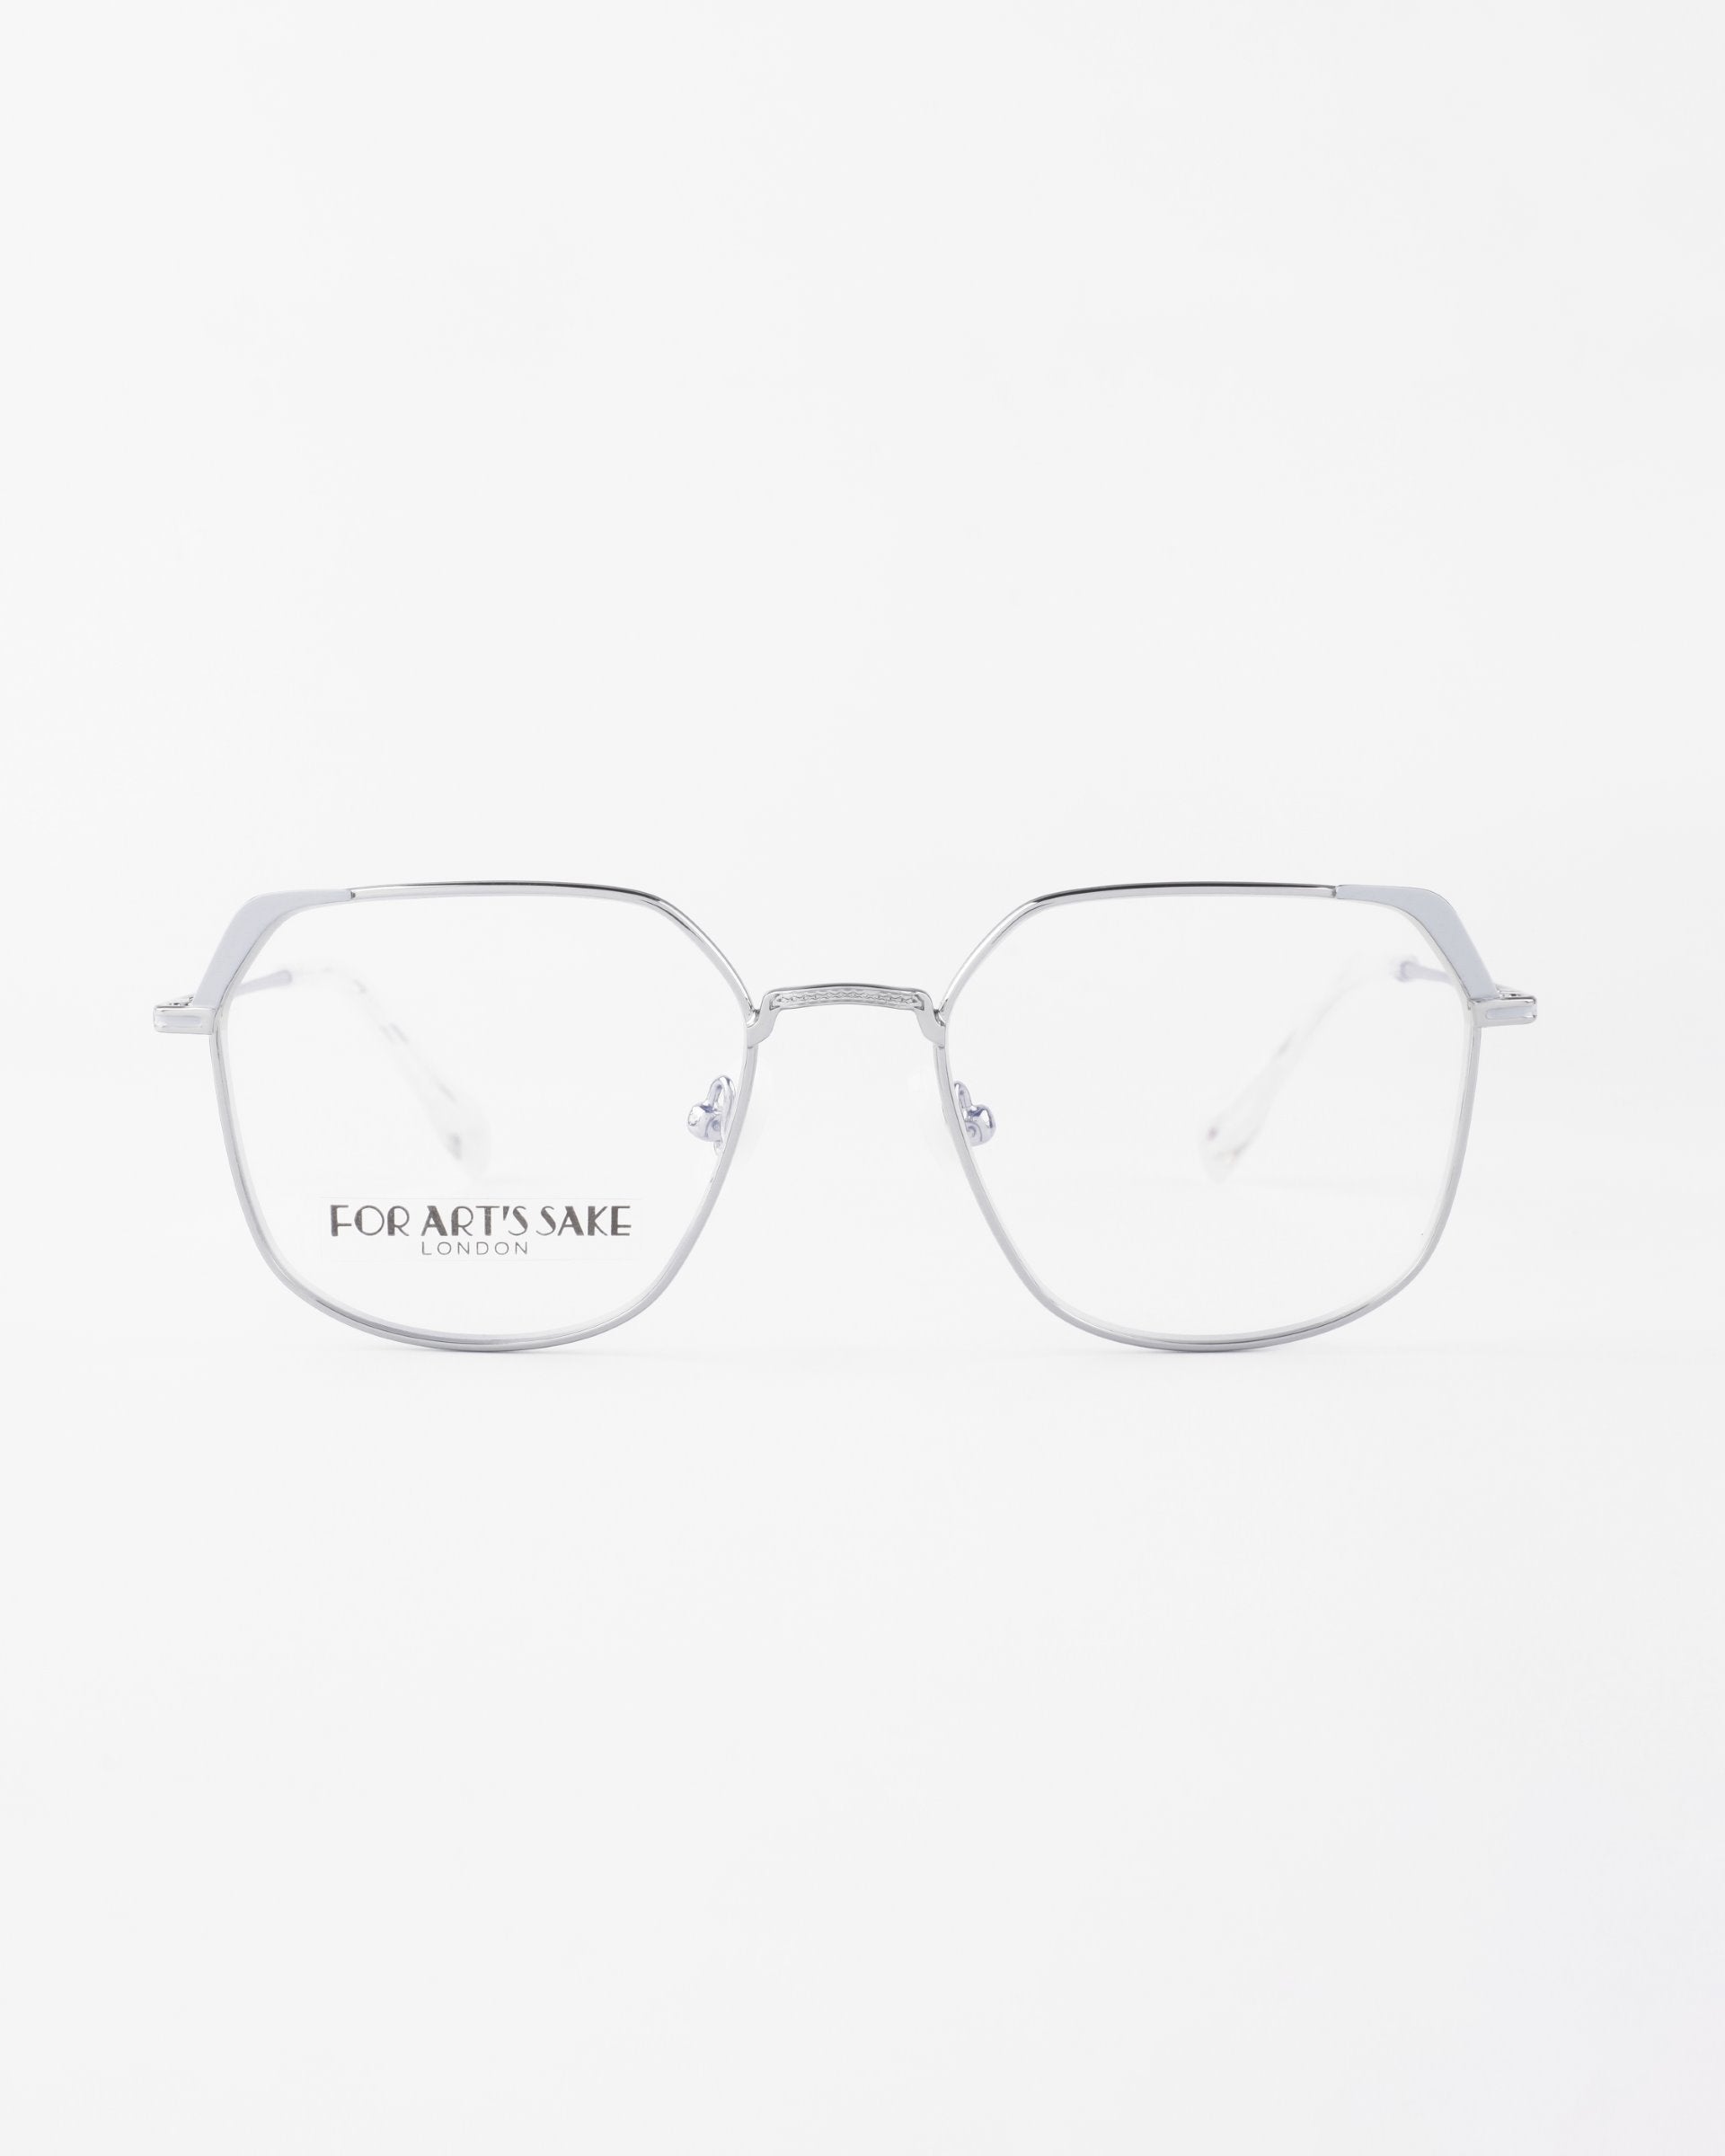 A pair of Godiva with metal frames and clear lenses featuring a blue light filter. The frames are thin and minimalist, with slightly rounded square shapes. The words "FOR ART'S SAKE LONDON" are printed on the left lens. The background is plain white.